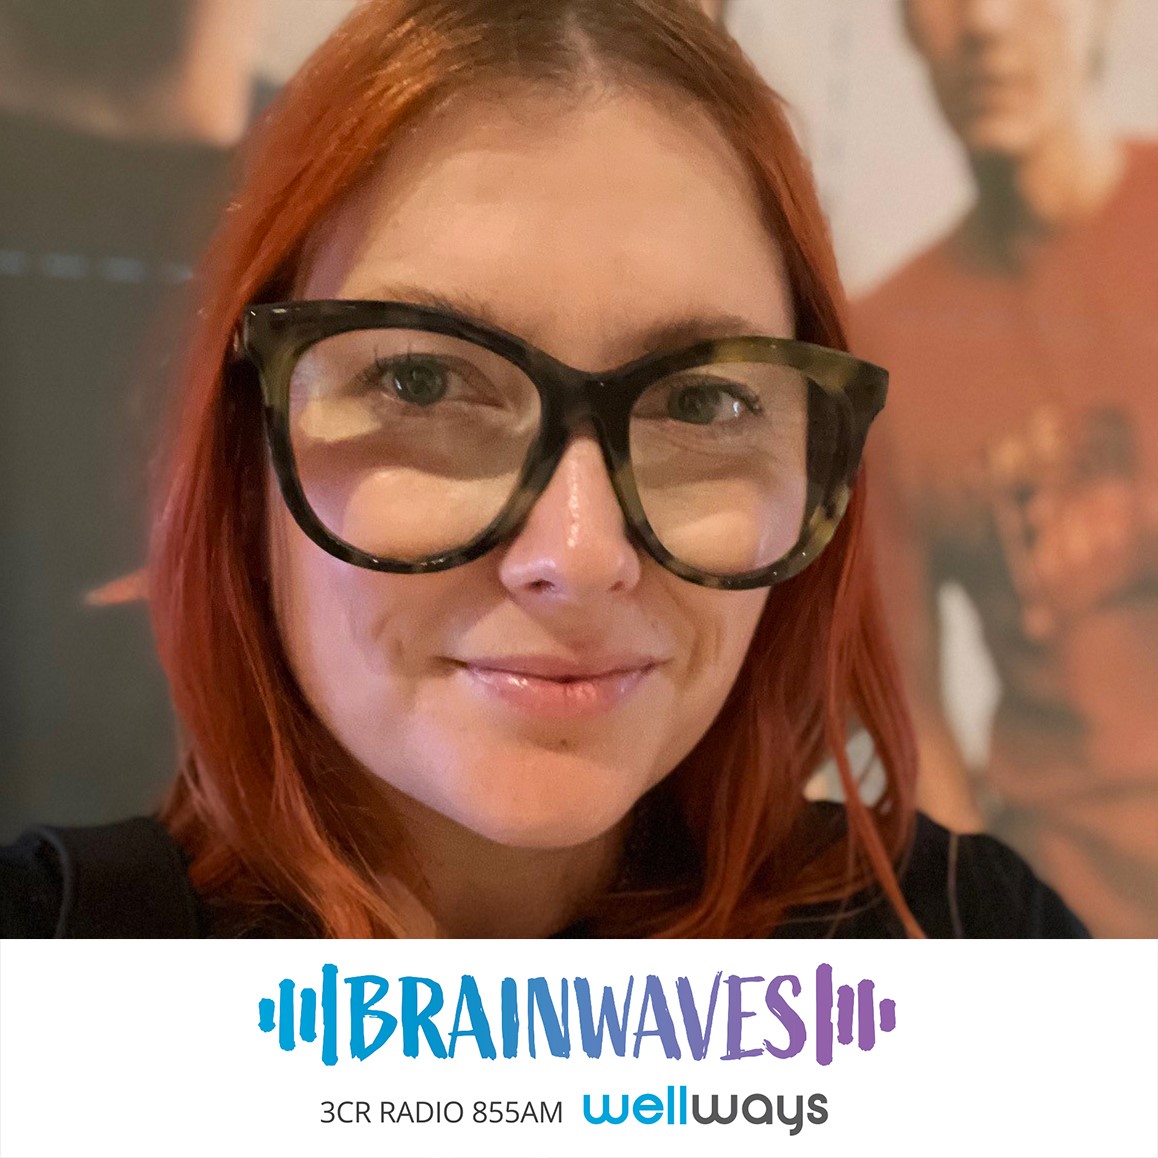 Cassie Walker is a caucasian woman with bright red shoulder length hair, she has large black-rimmed glasses and is wearing a black top. She looks at the camera a smirks. The brainwaves logo is in blue and purple and is placed at the bottom of the image. Cassie is today's guest on Brainwaves talking about mental health and the music industry.